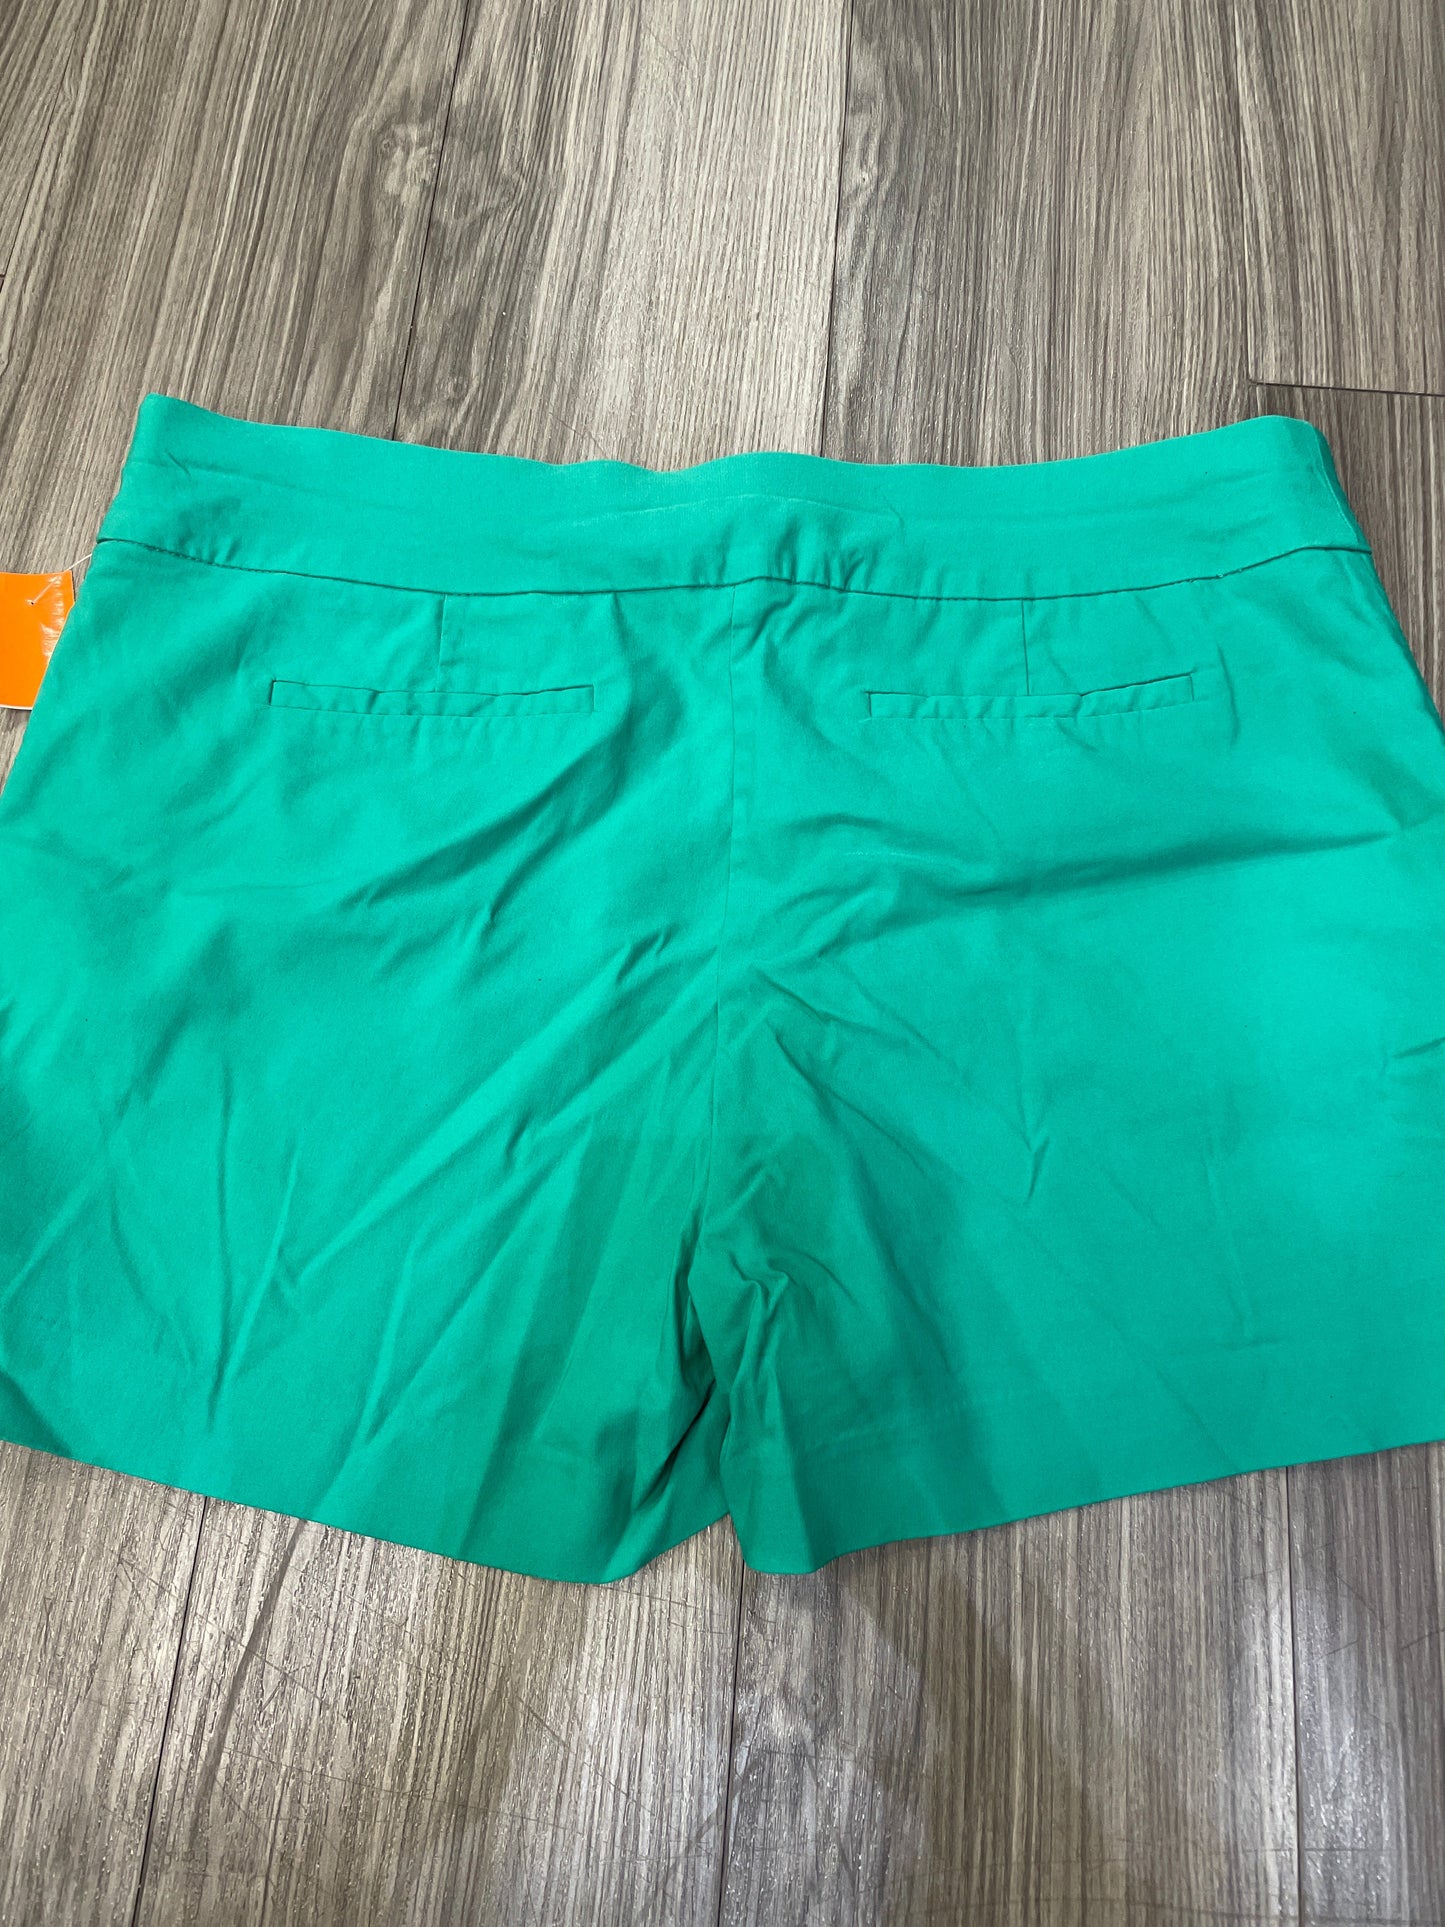 Shorts By New York And Co  Size: 2x